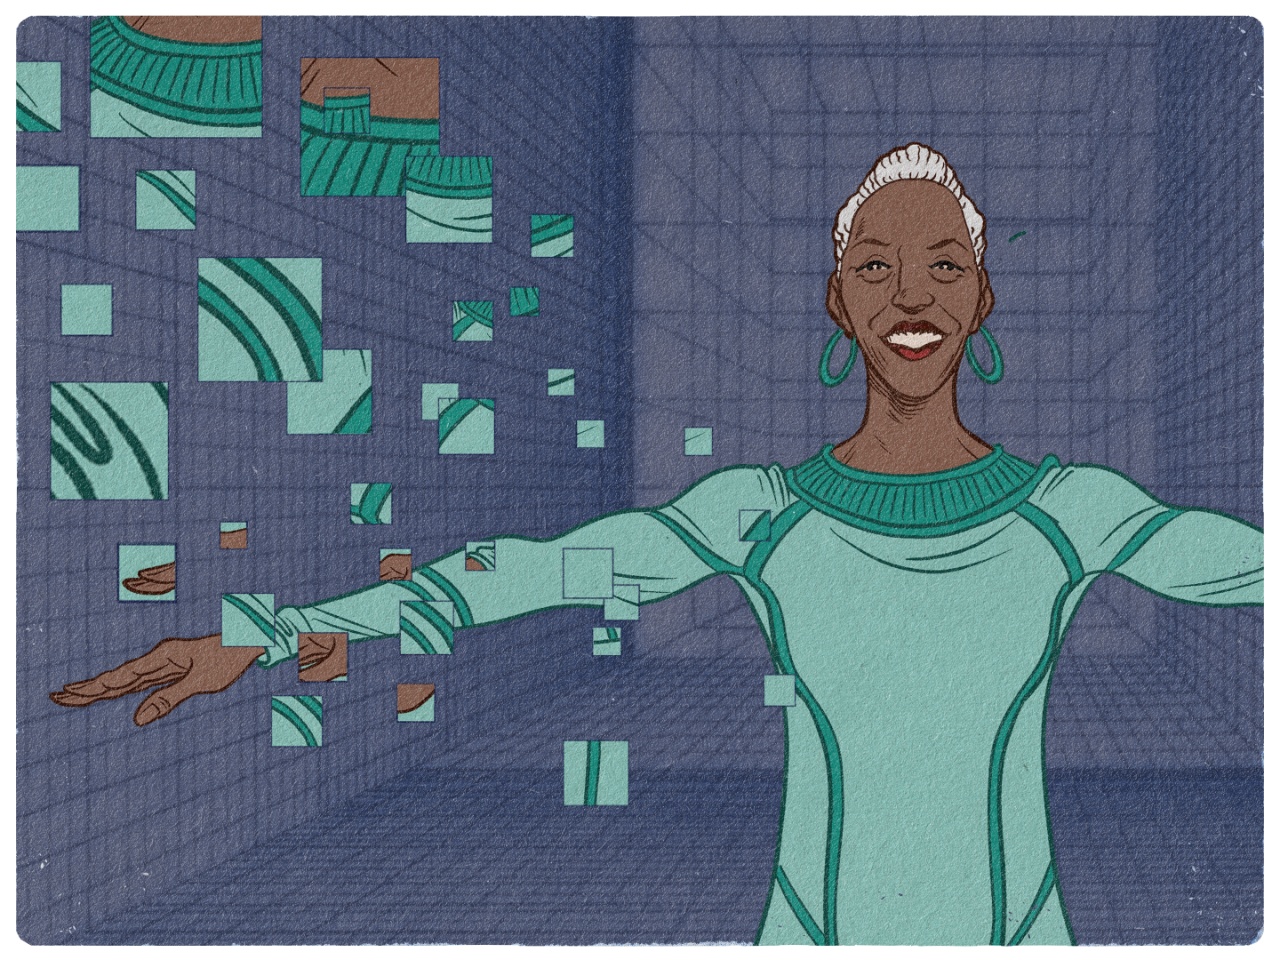 An illustration of a woman in a futuristic setting with her arms stretched out